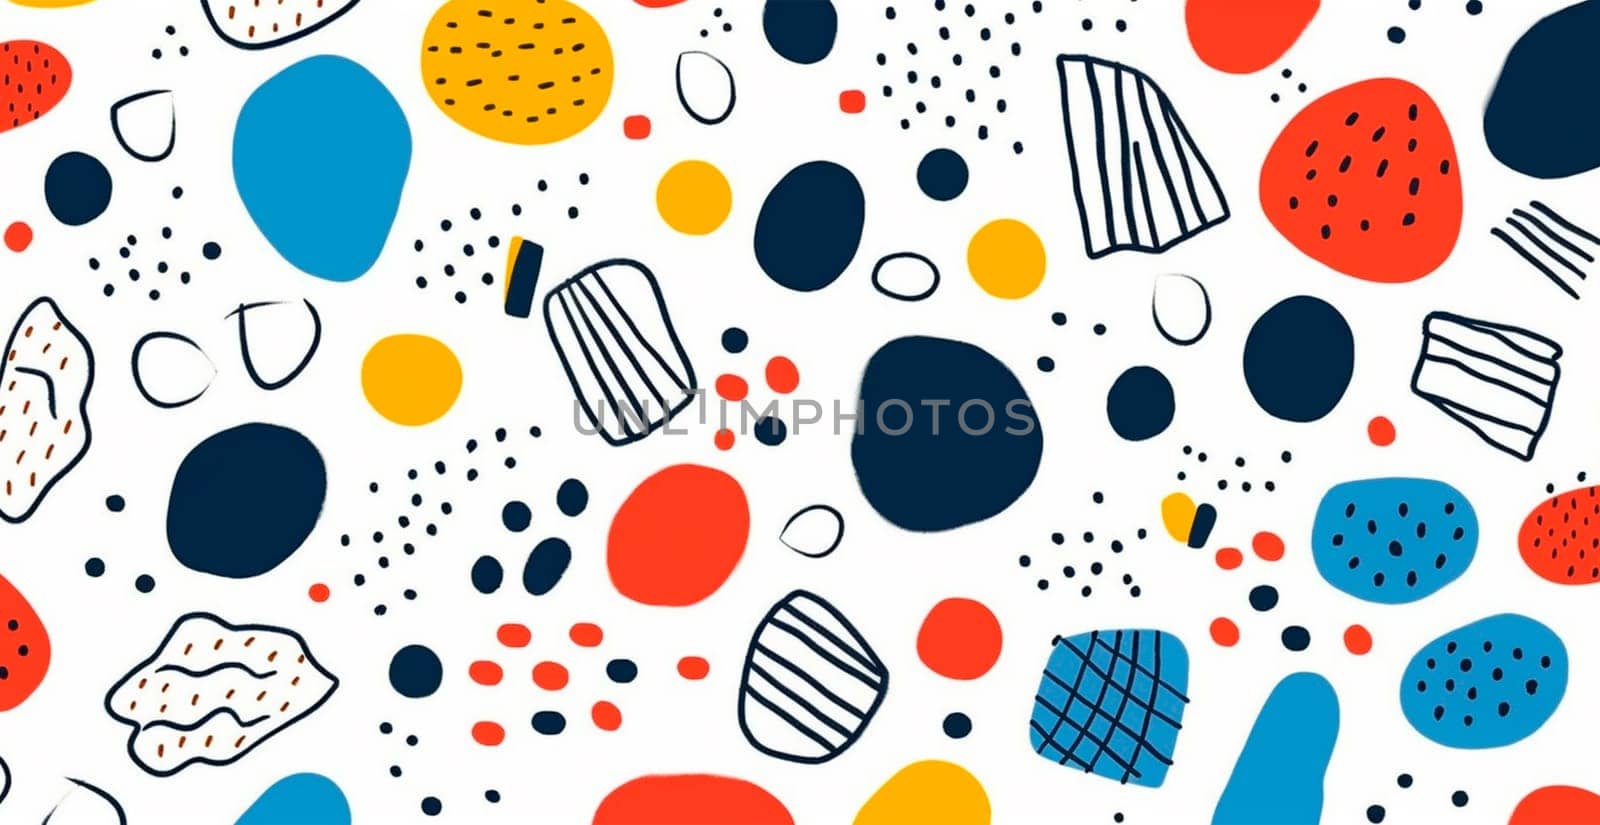 Abstract geometric shapes multicolored bright background by BEMPhoto